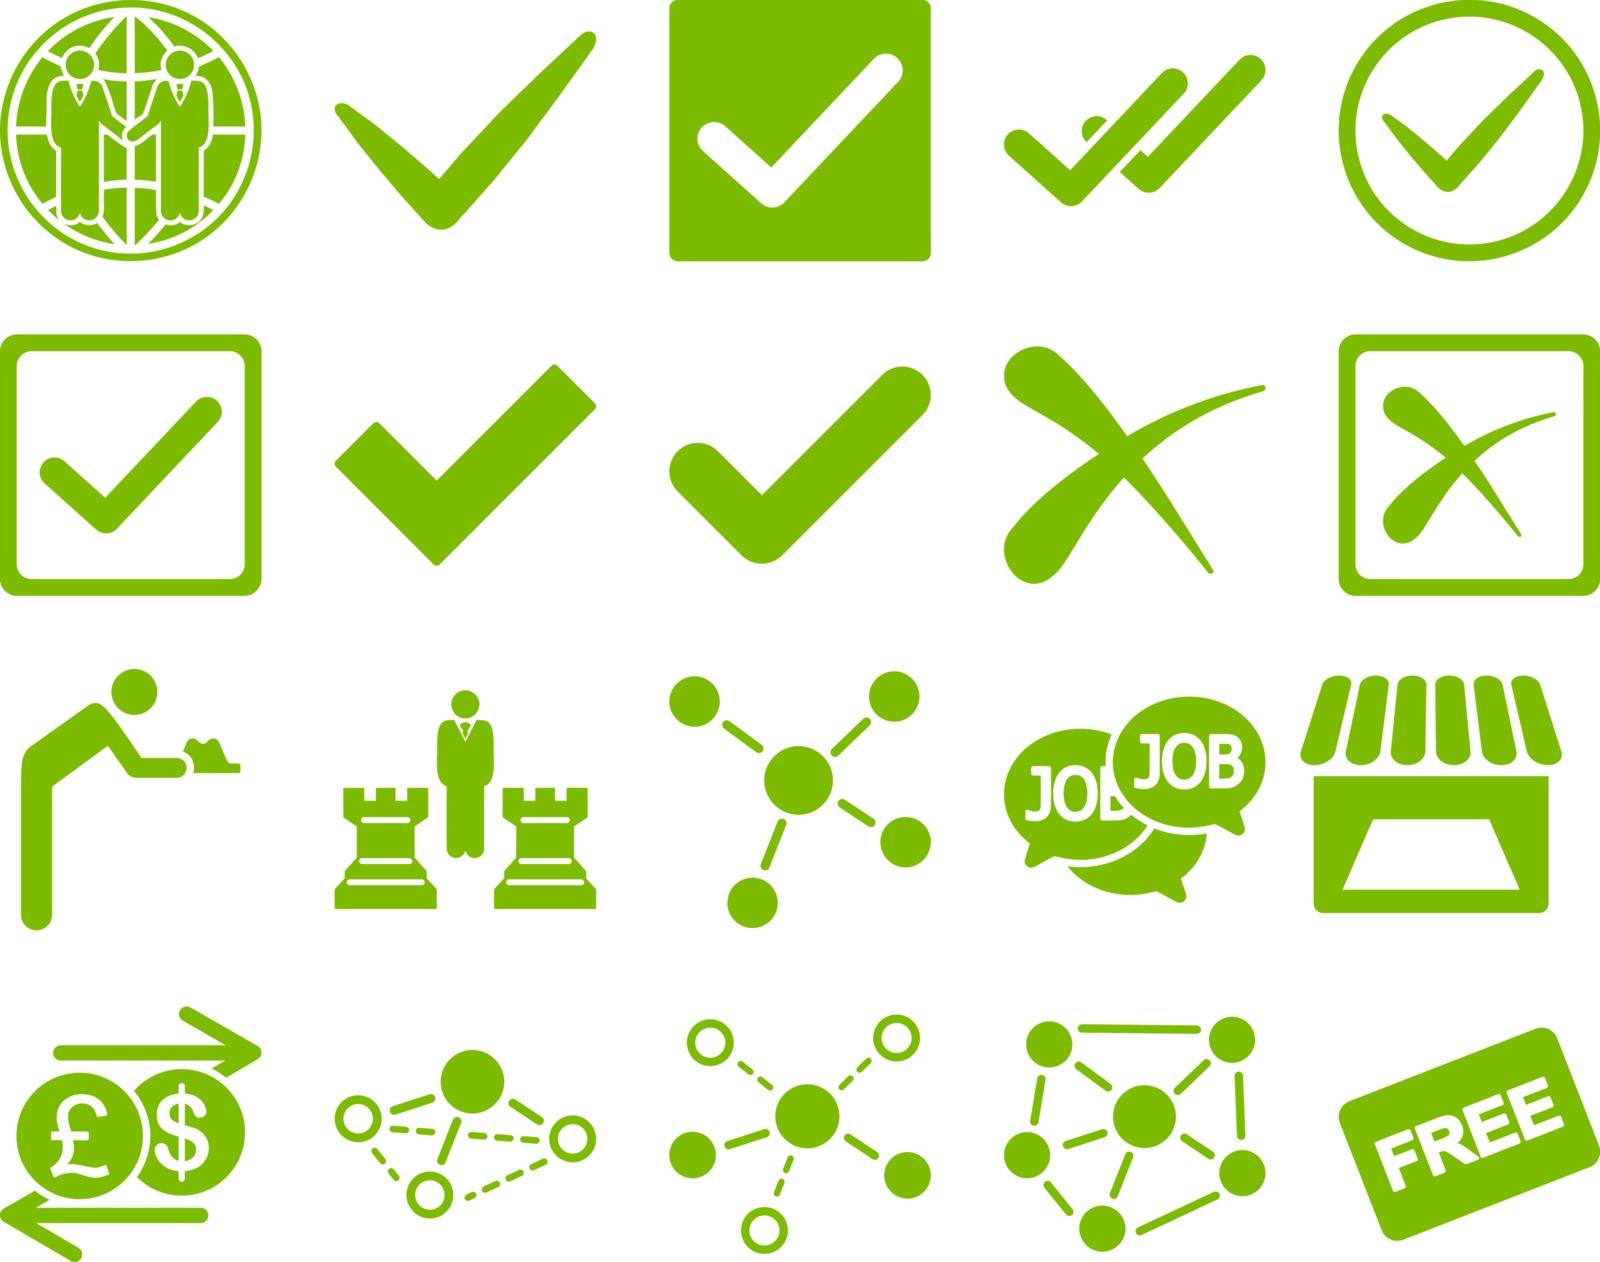 Agreement and trade links icon set. These flat symbols use eco green color. Vector images are isolated on a white background. Angles are rounded.